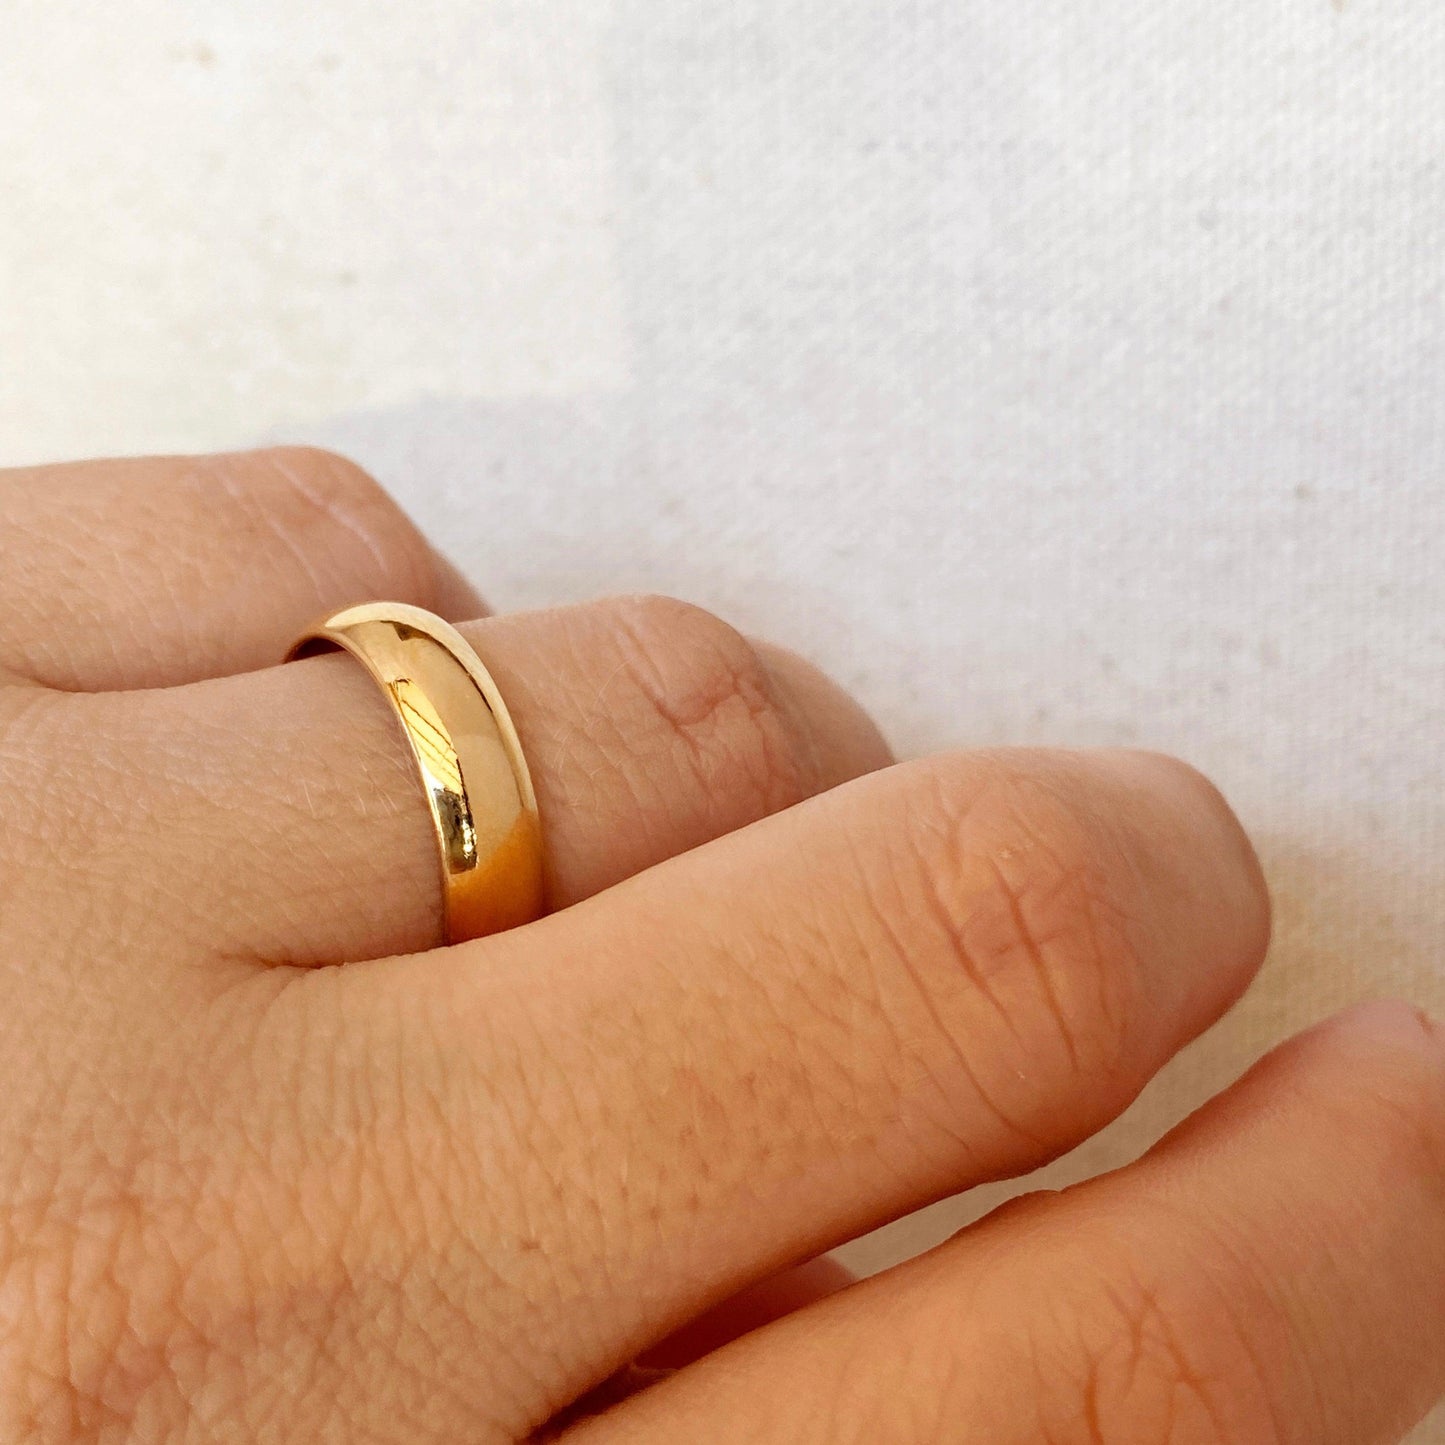 GoldFi 18k Gold Filled Wide Band Ring